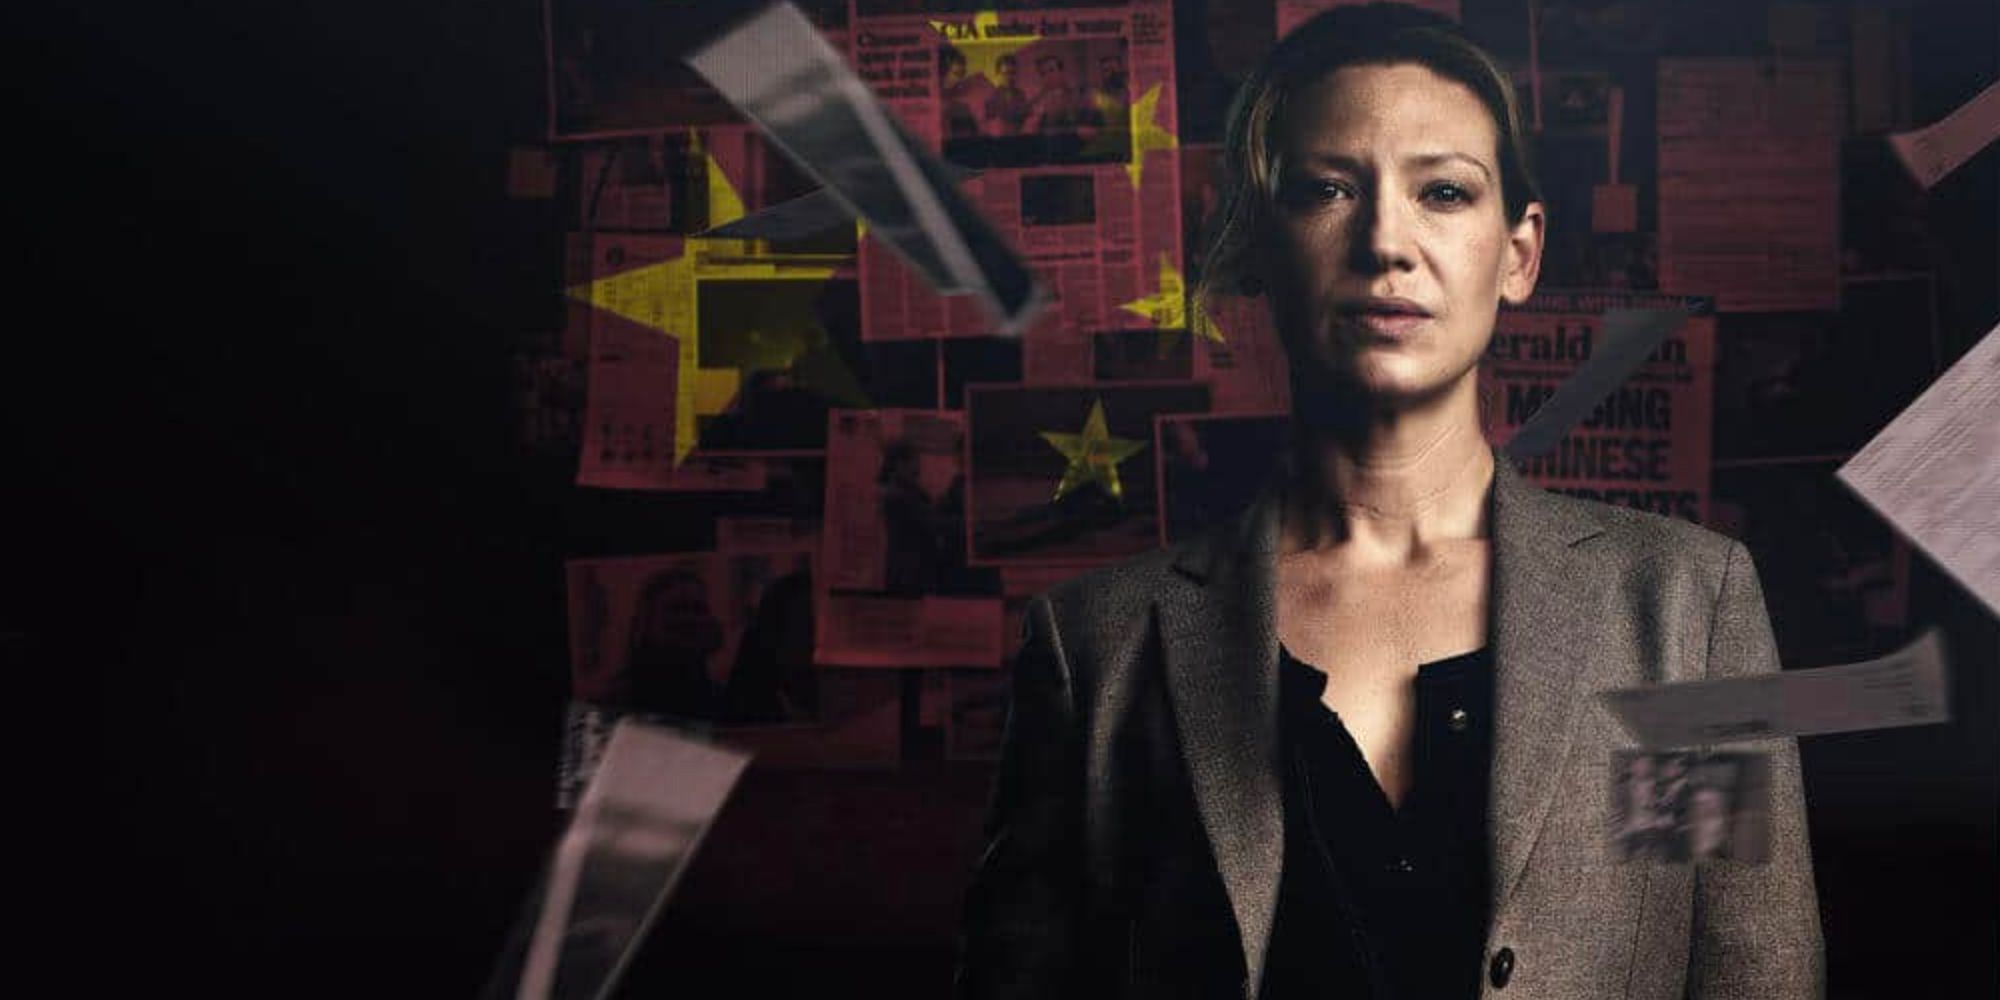 Poppy Montgomery with files and newspaper clippings around her in a promotional image for Secret City